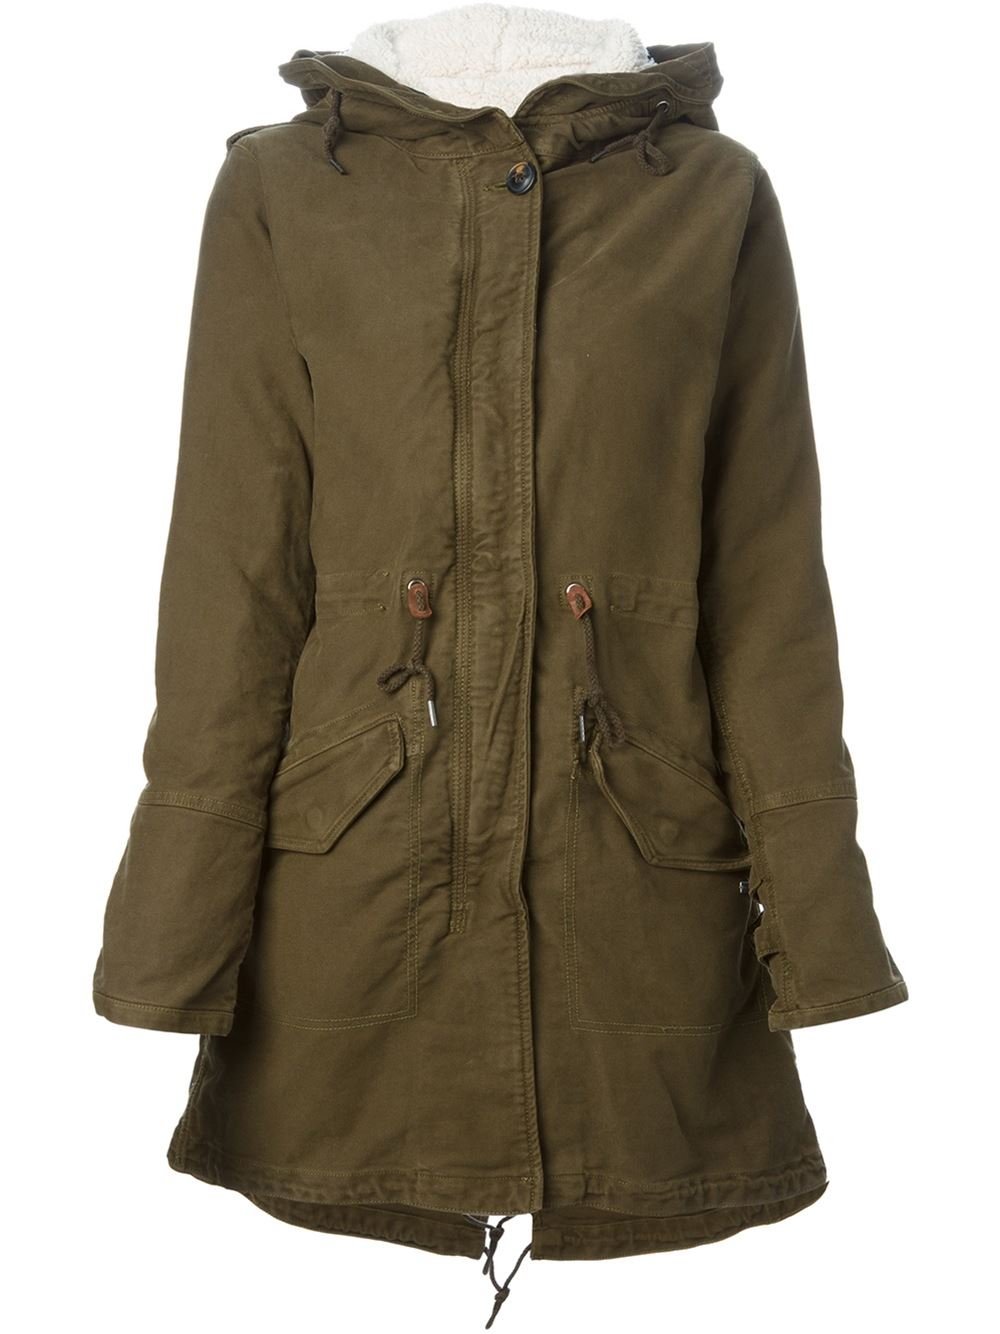 Lyst - Maison scotch Hooded Full Lined Parka in Green